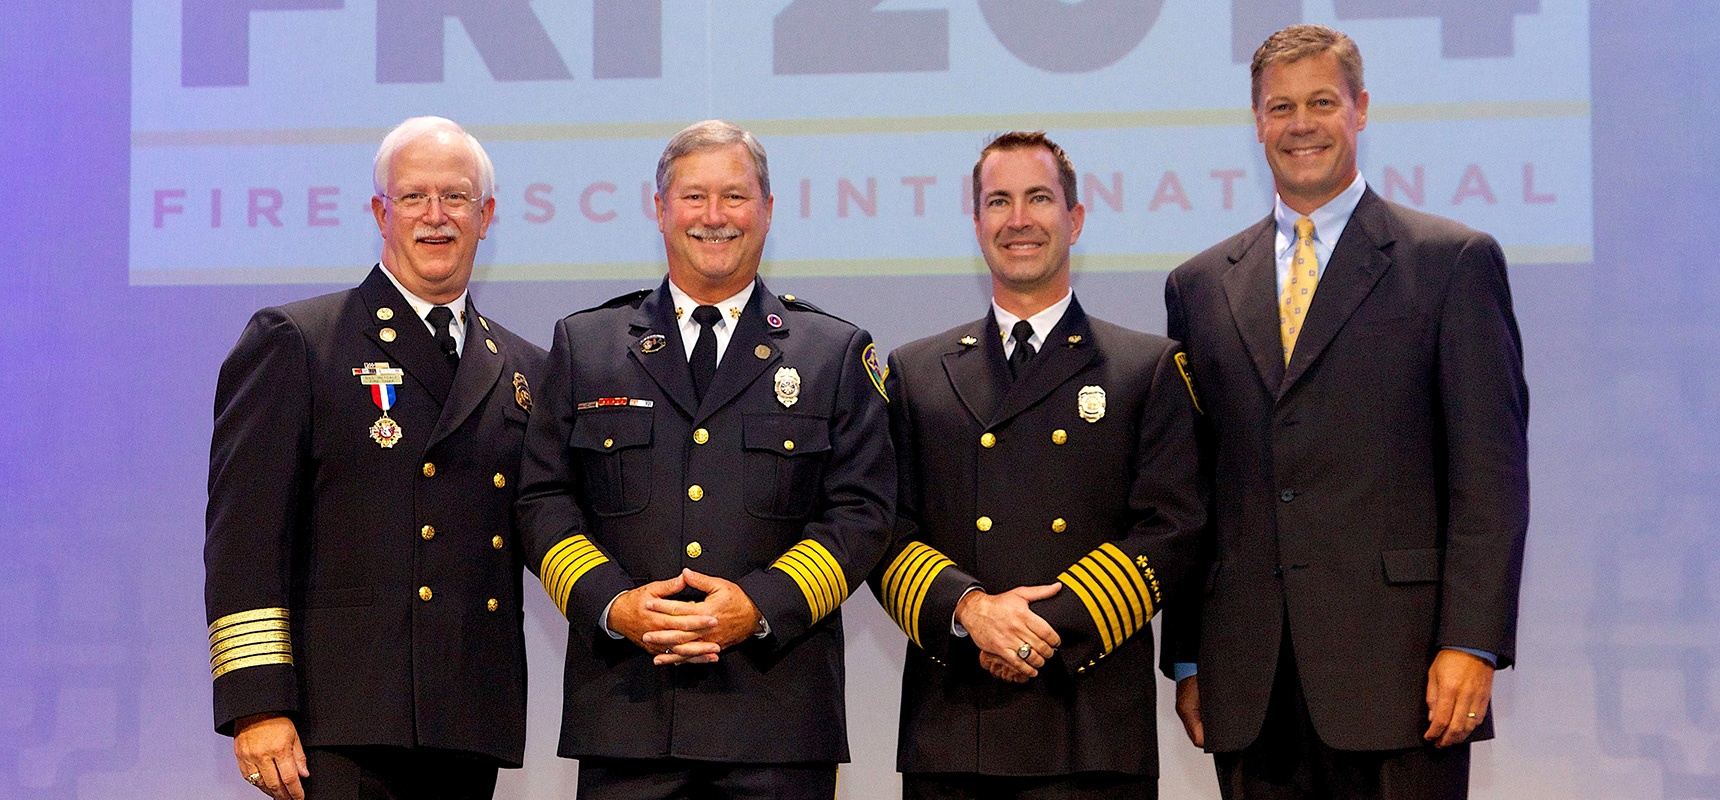 Pierce-Manufacturing-And-The-IAFC-Honor-2014-Volunteer-And-Career-Fire-Chiefs-Of-The-Year_Header.jpg